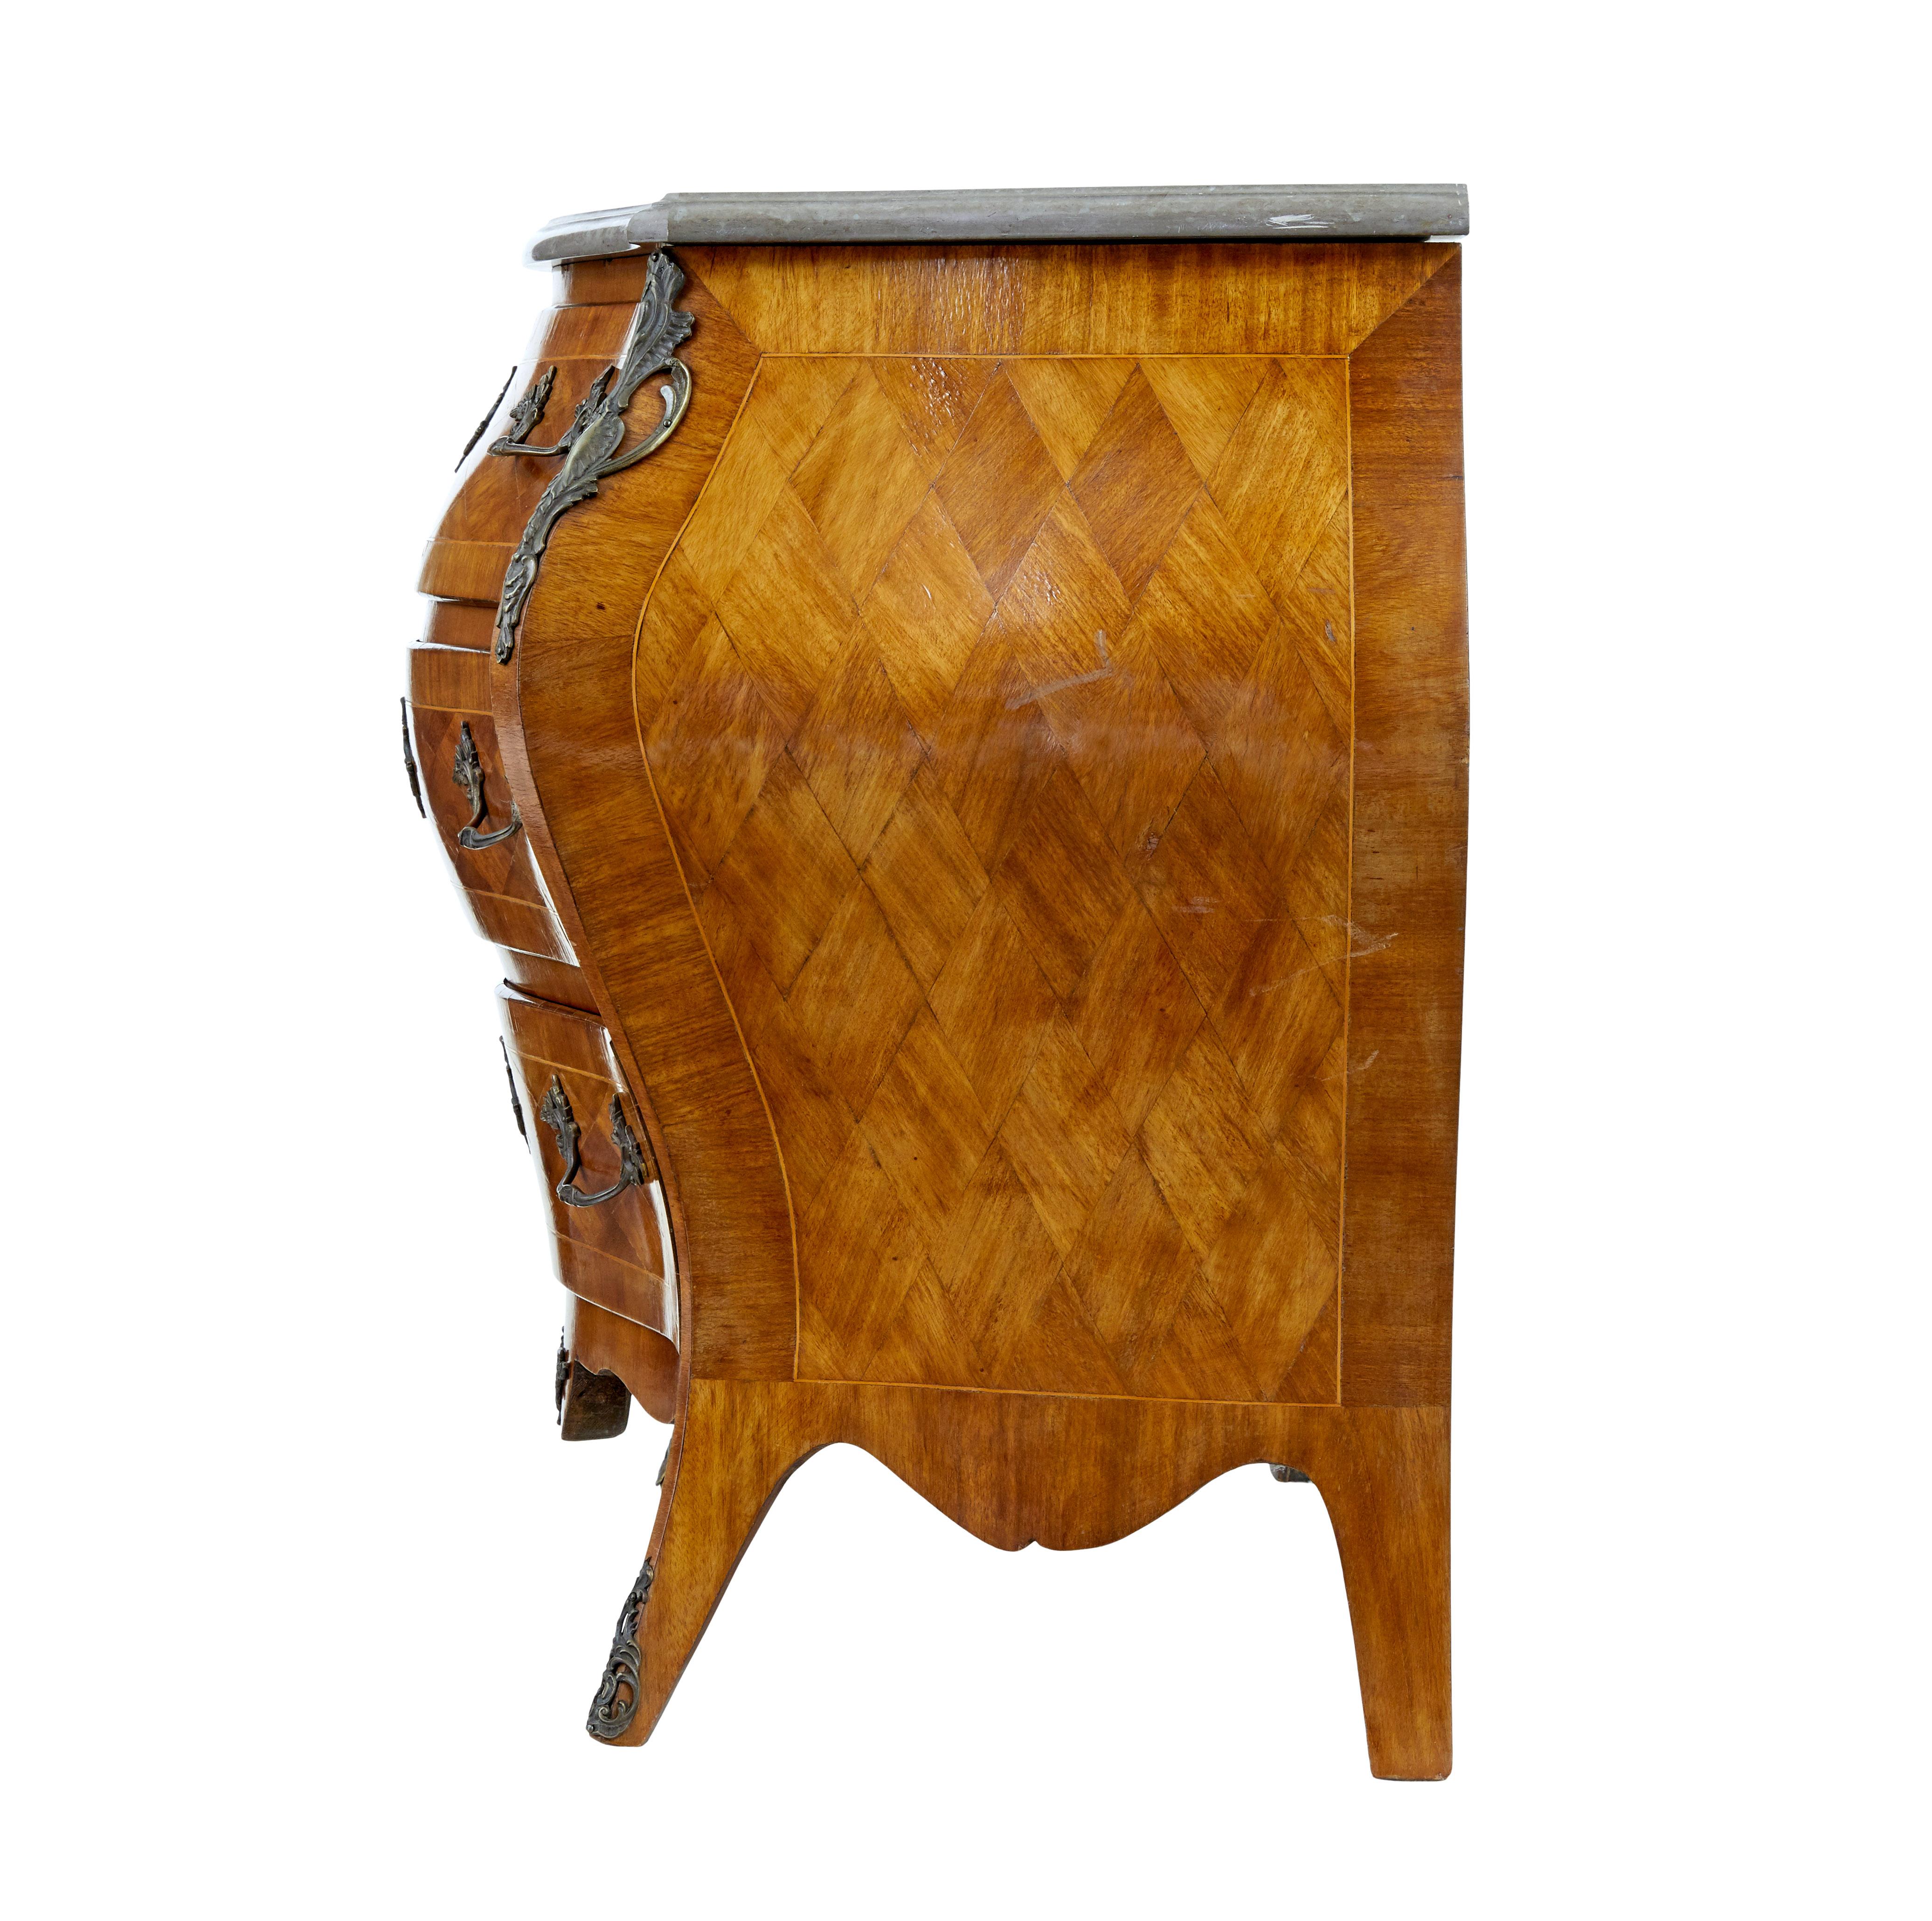 Rococo Revival 20th century French walnut marble-top commode For Sale